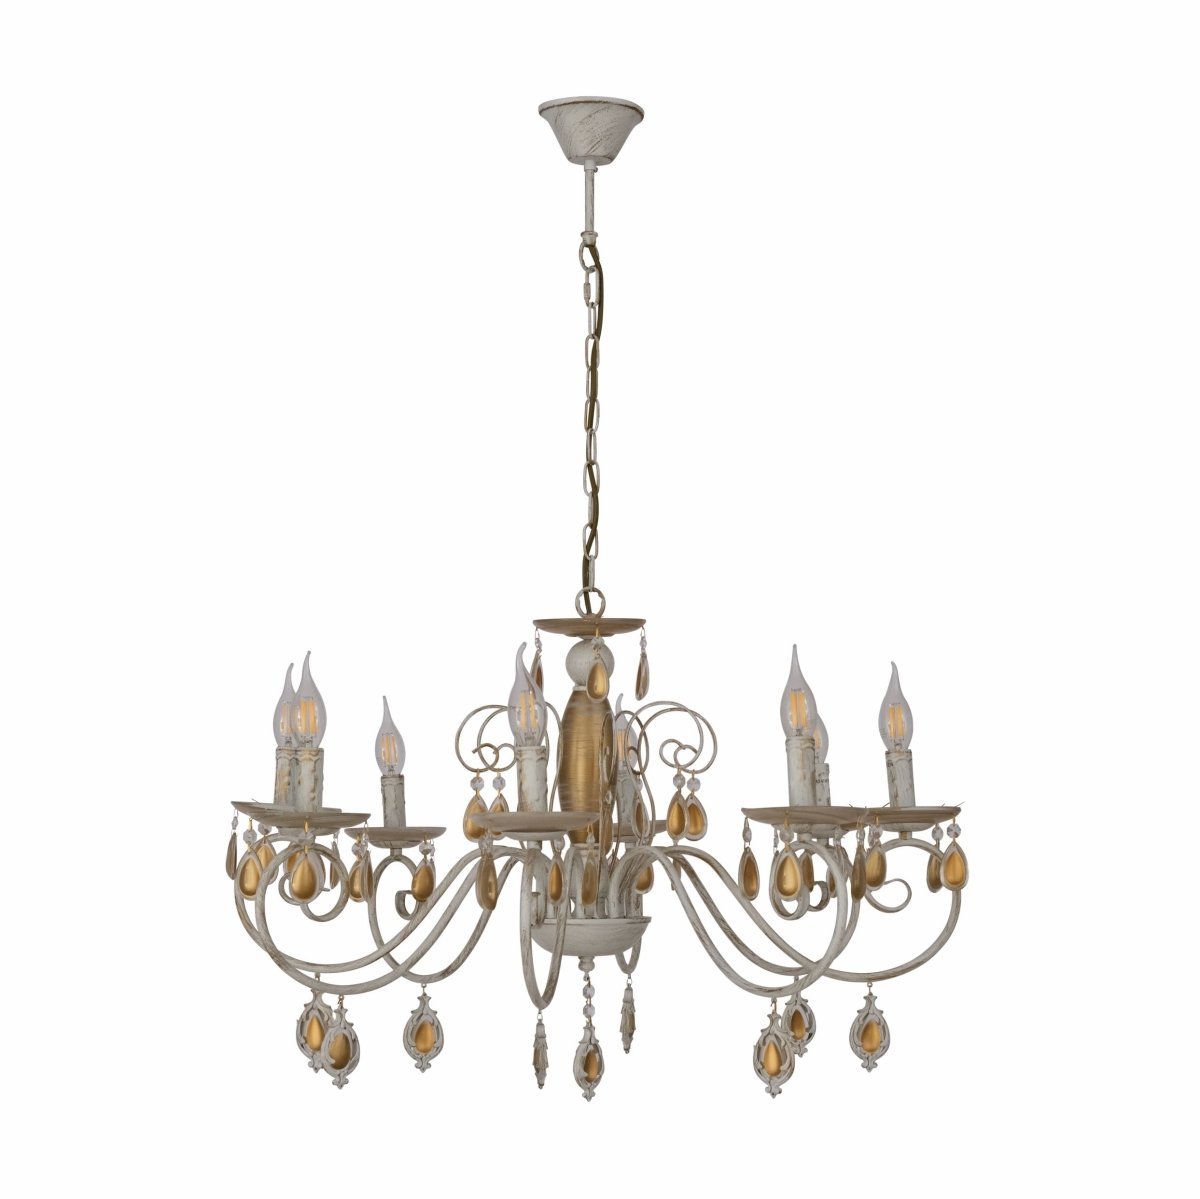 Main image of Amber Crystal Gold and White Metal 8 Arm Chandelier with E14 Fitting | TEKLED 158-19444